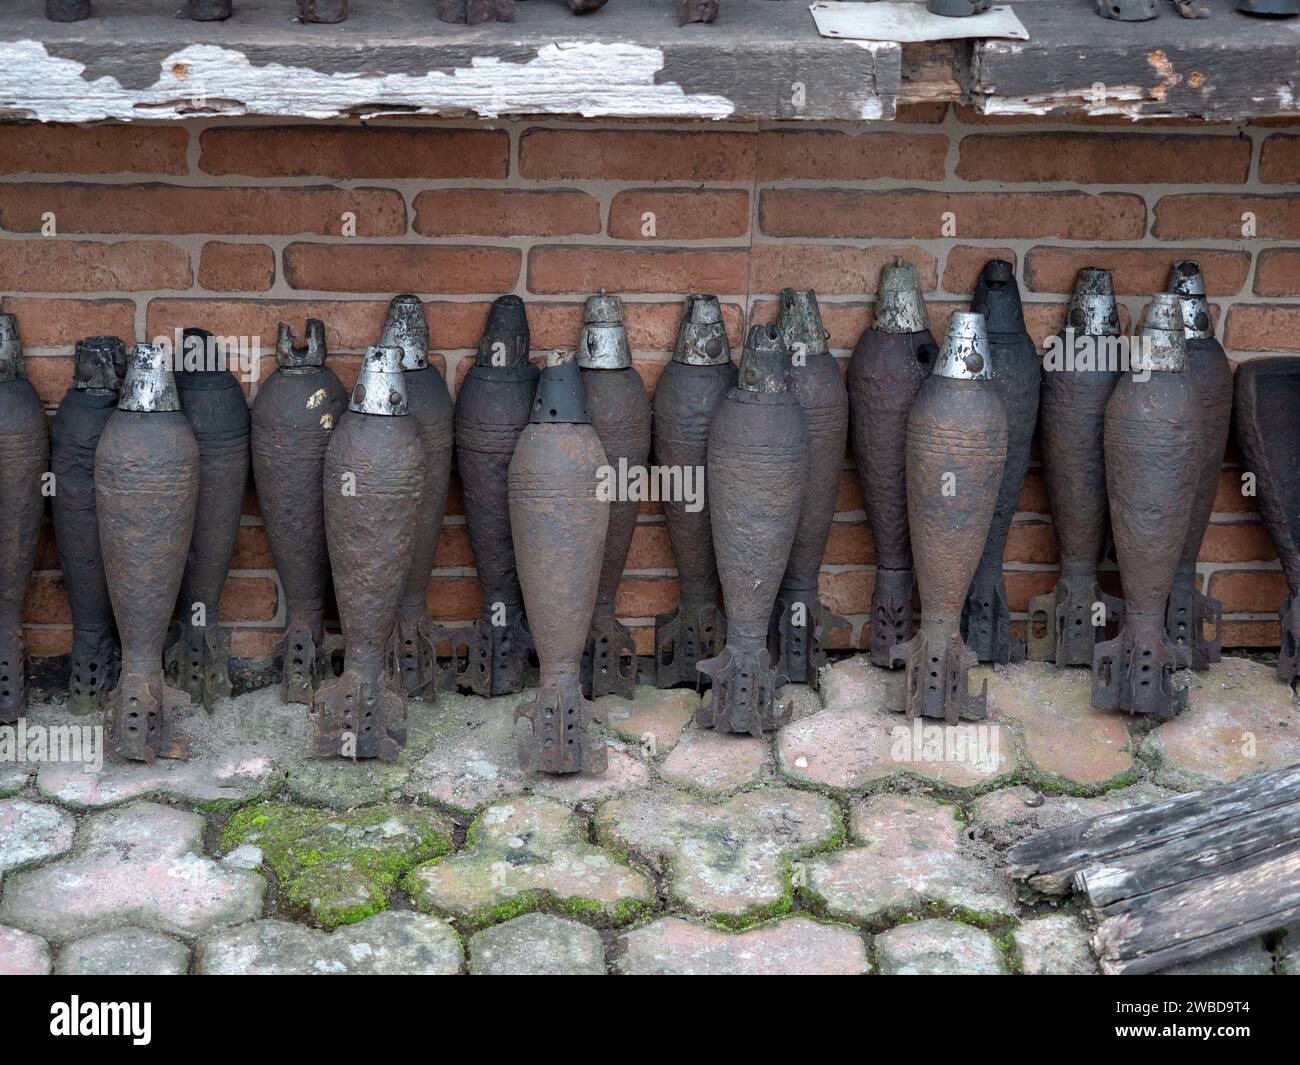 High explosive mortar round as the legacy of Japanese colonialism in Philippines. Stock Photo